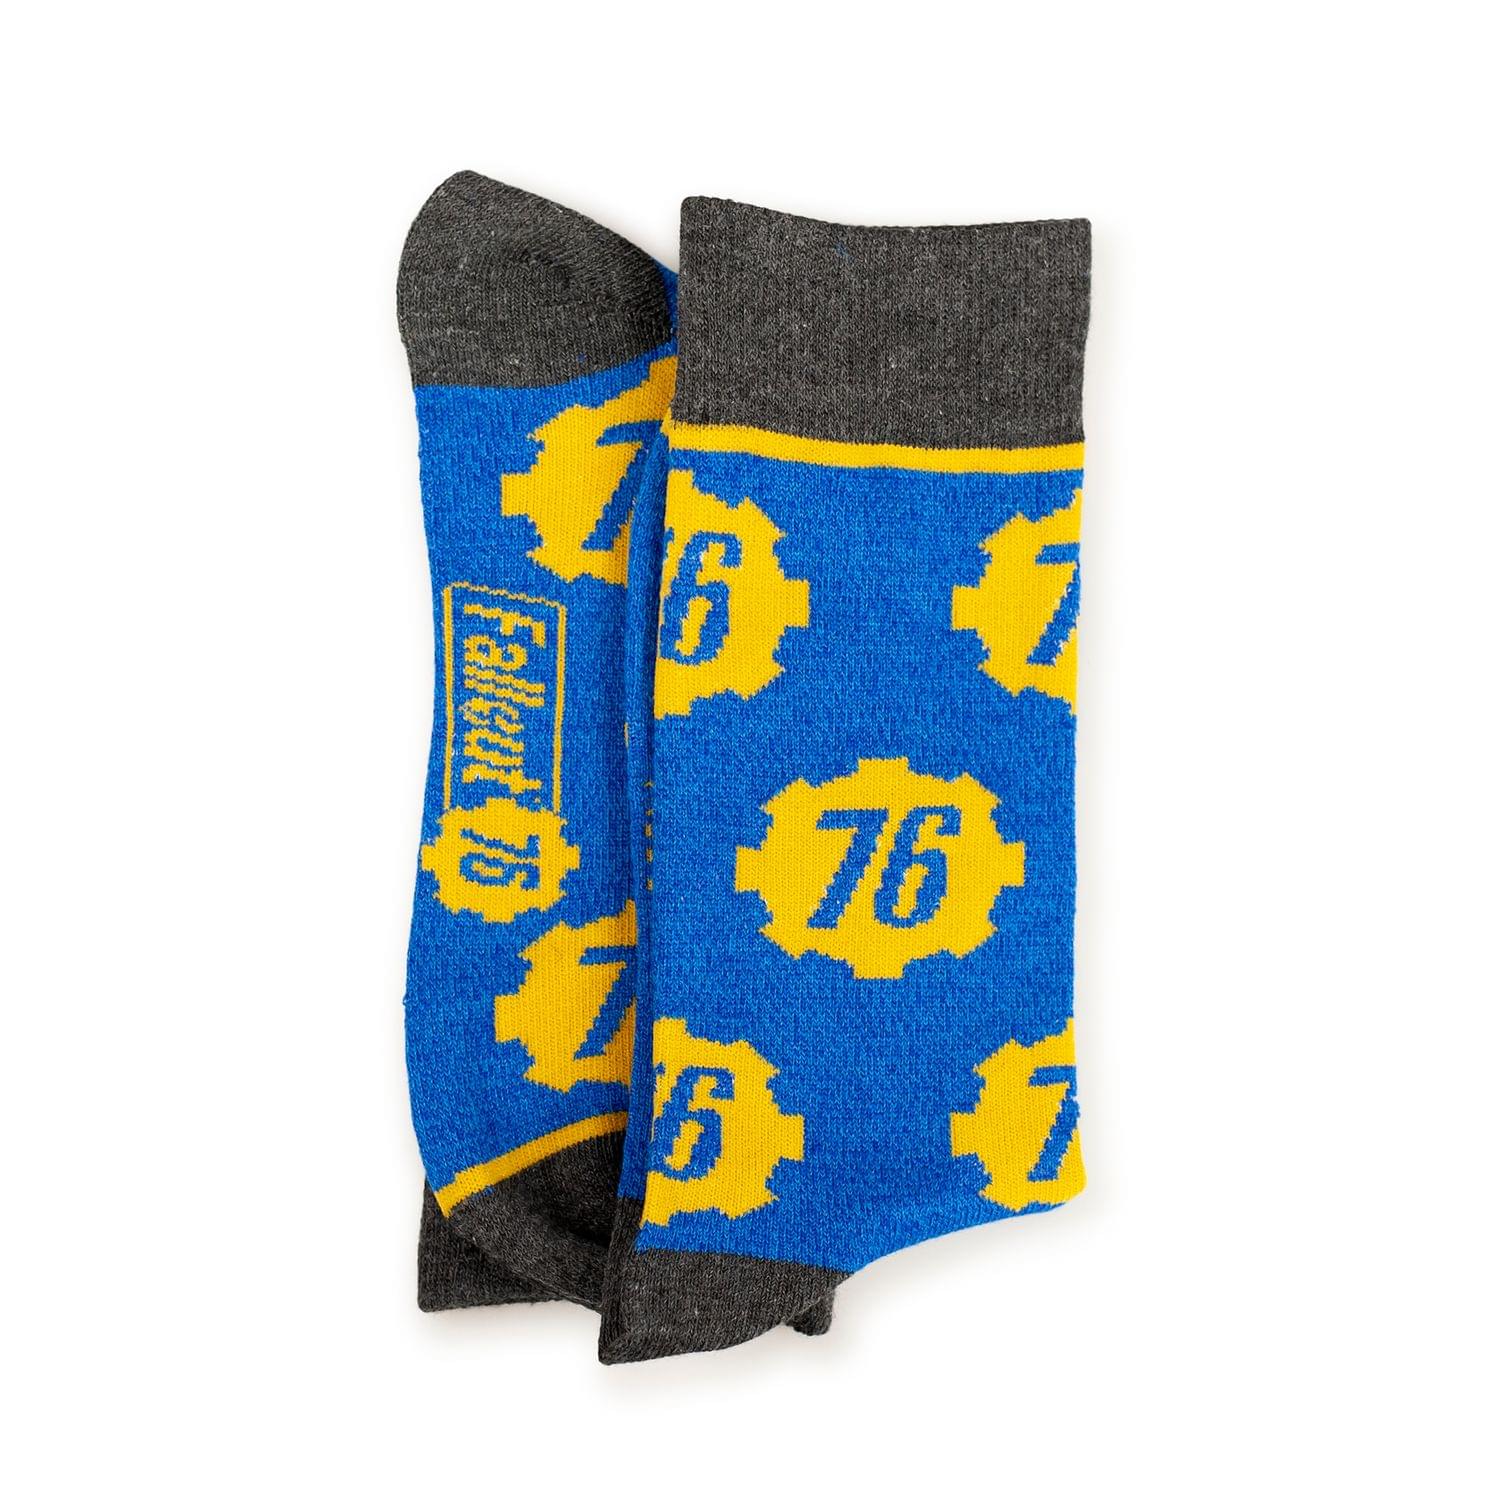 Fallout Collectibles | Blue & Yellow Crew Socks | BIOWORLD Fallout collection